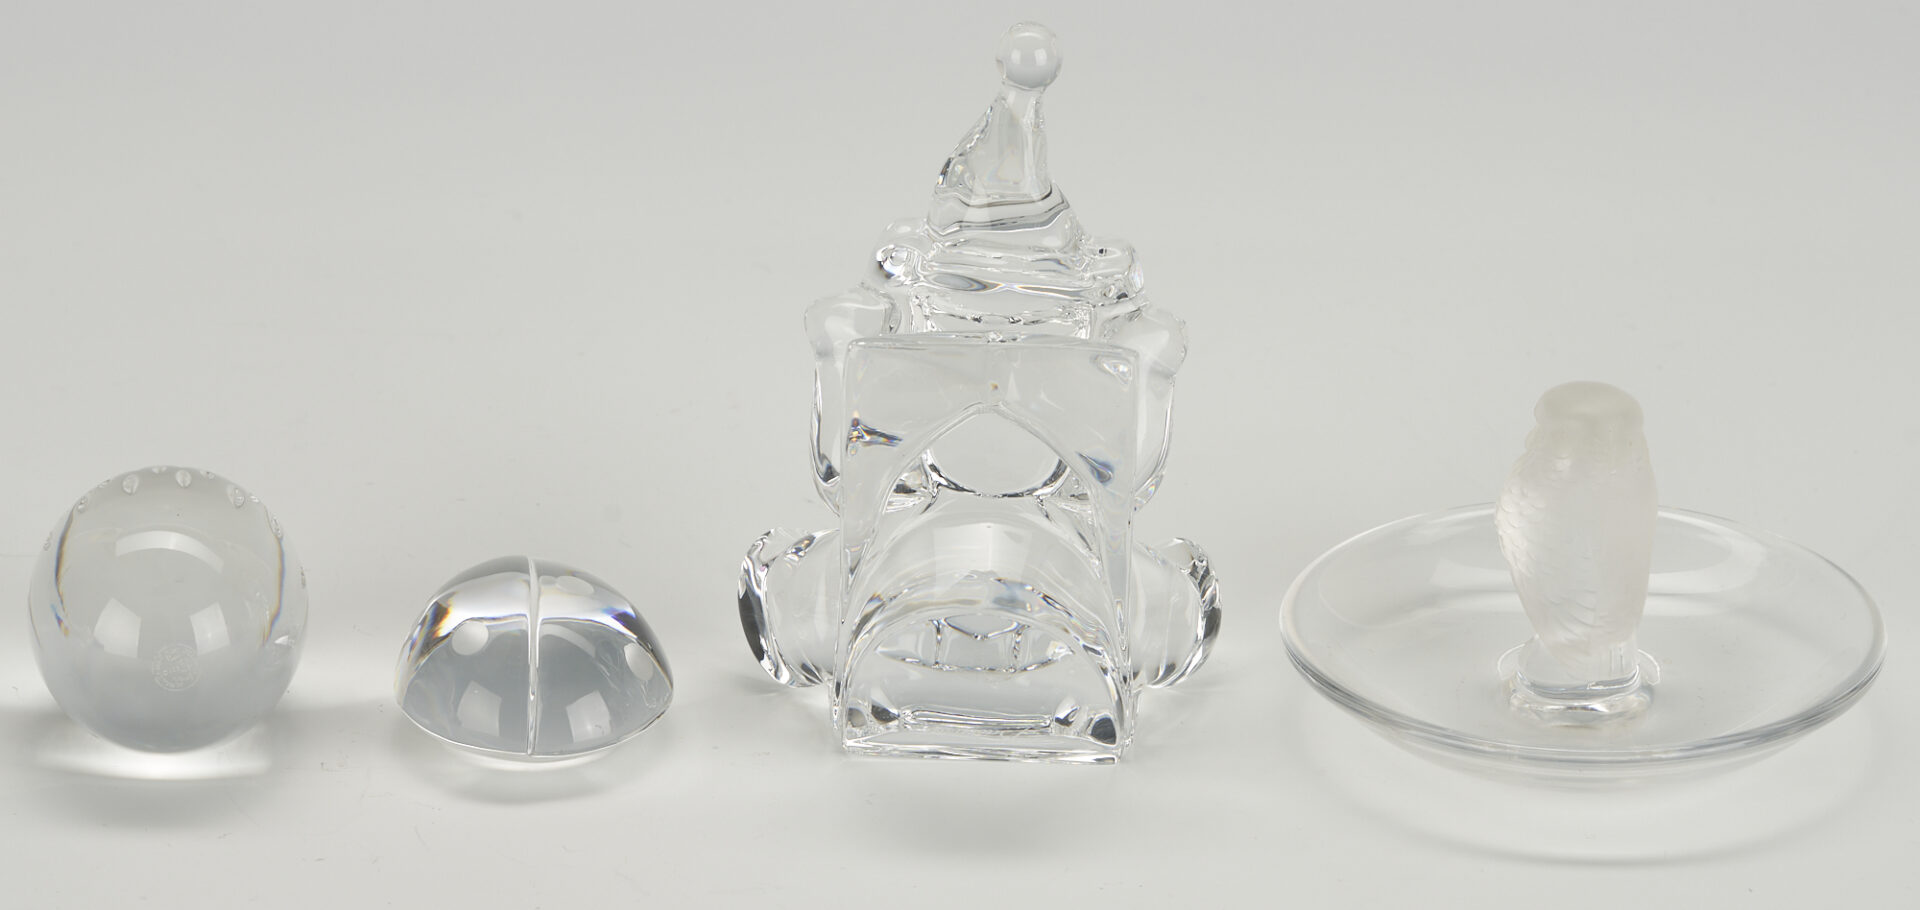 Lot 947: Grouping of 8 Figural Crystal Items, incl. Faberge, Baccarat, & Lalique